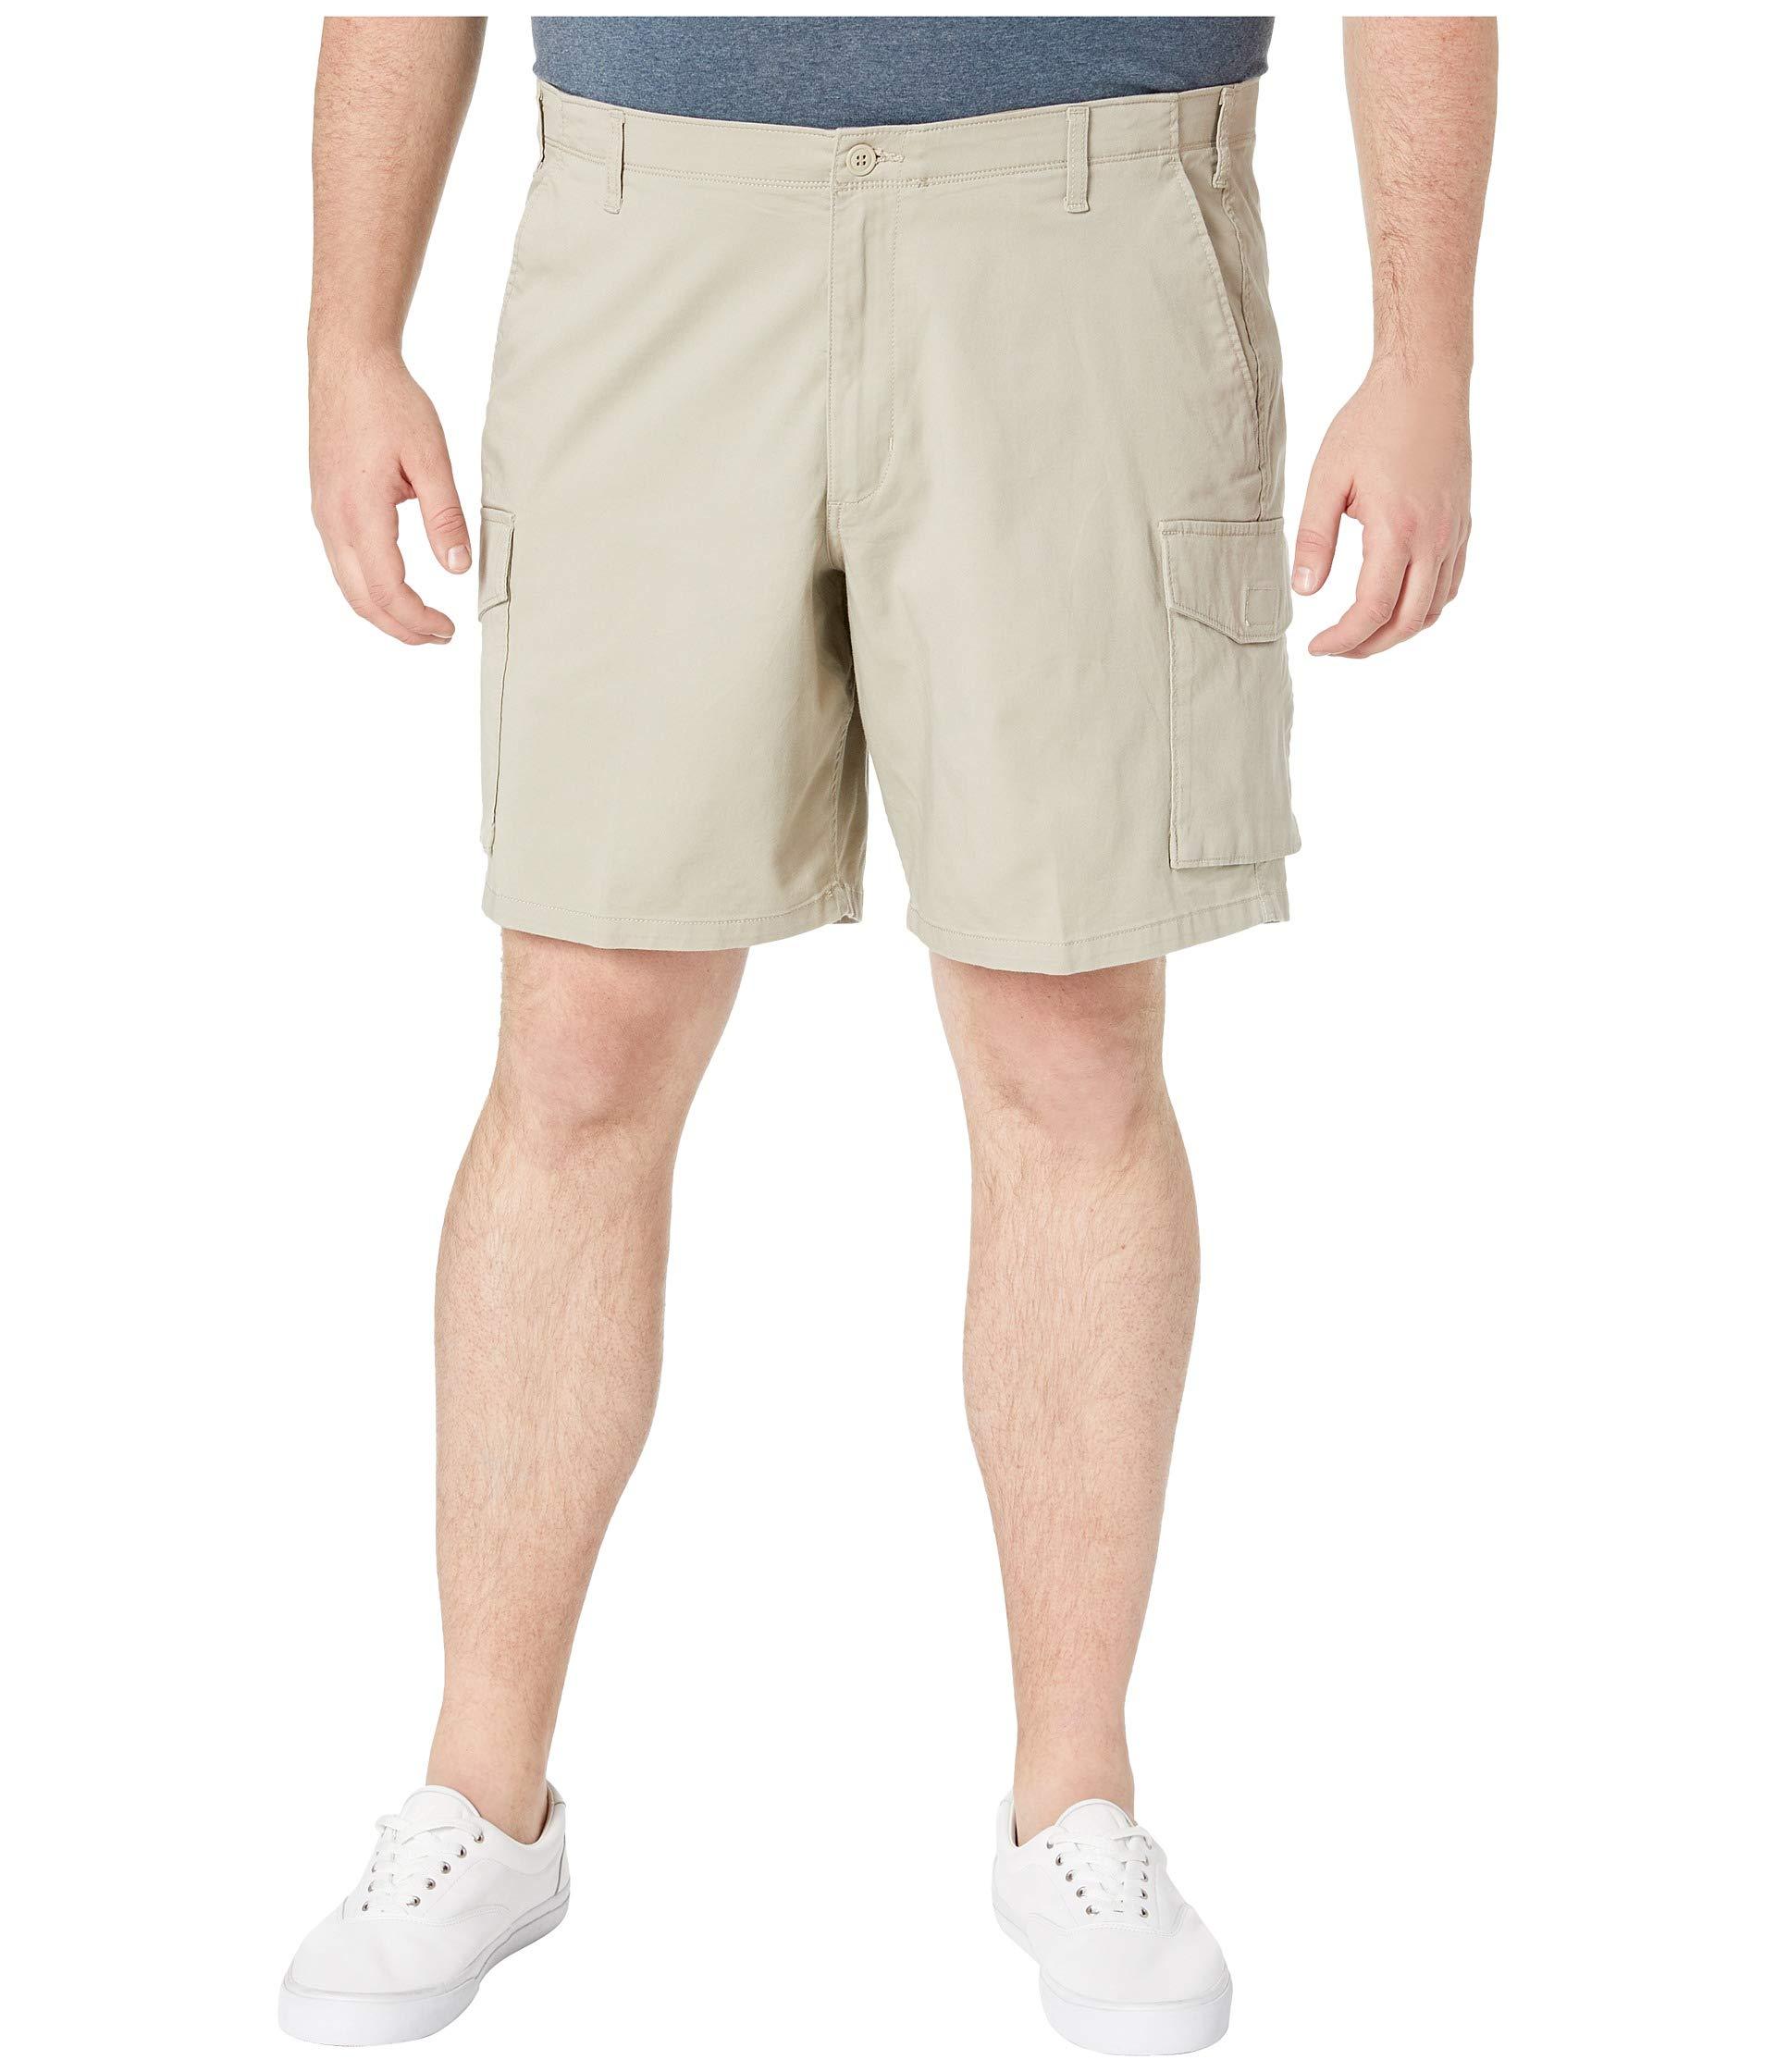 Dockers Cotton Big Tall Cargo Shorts in Beige (Natural) for Men - Lyst